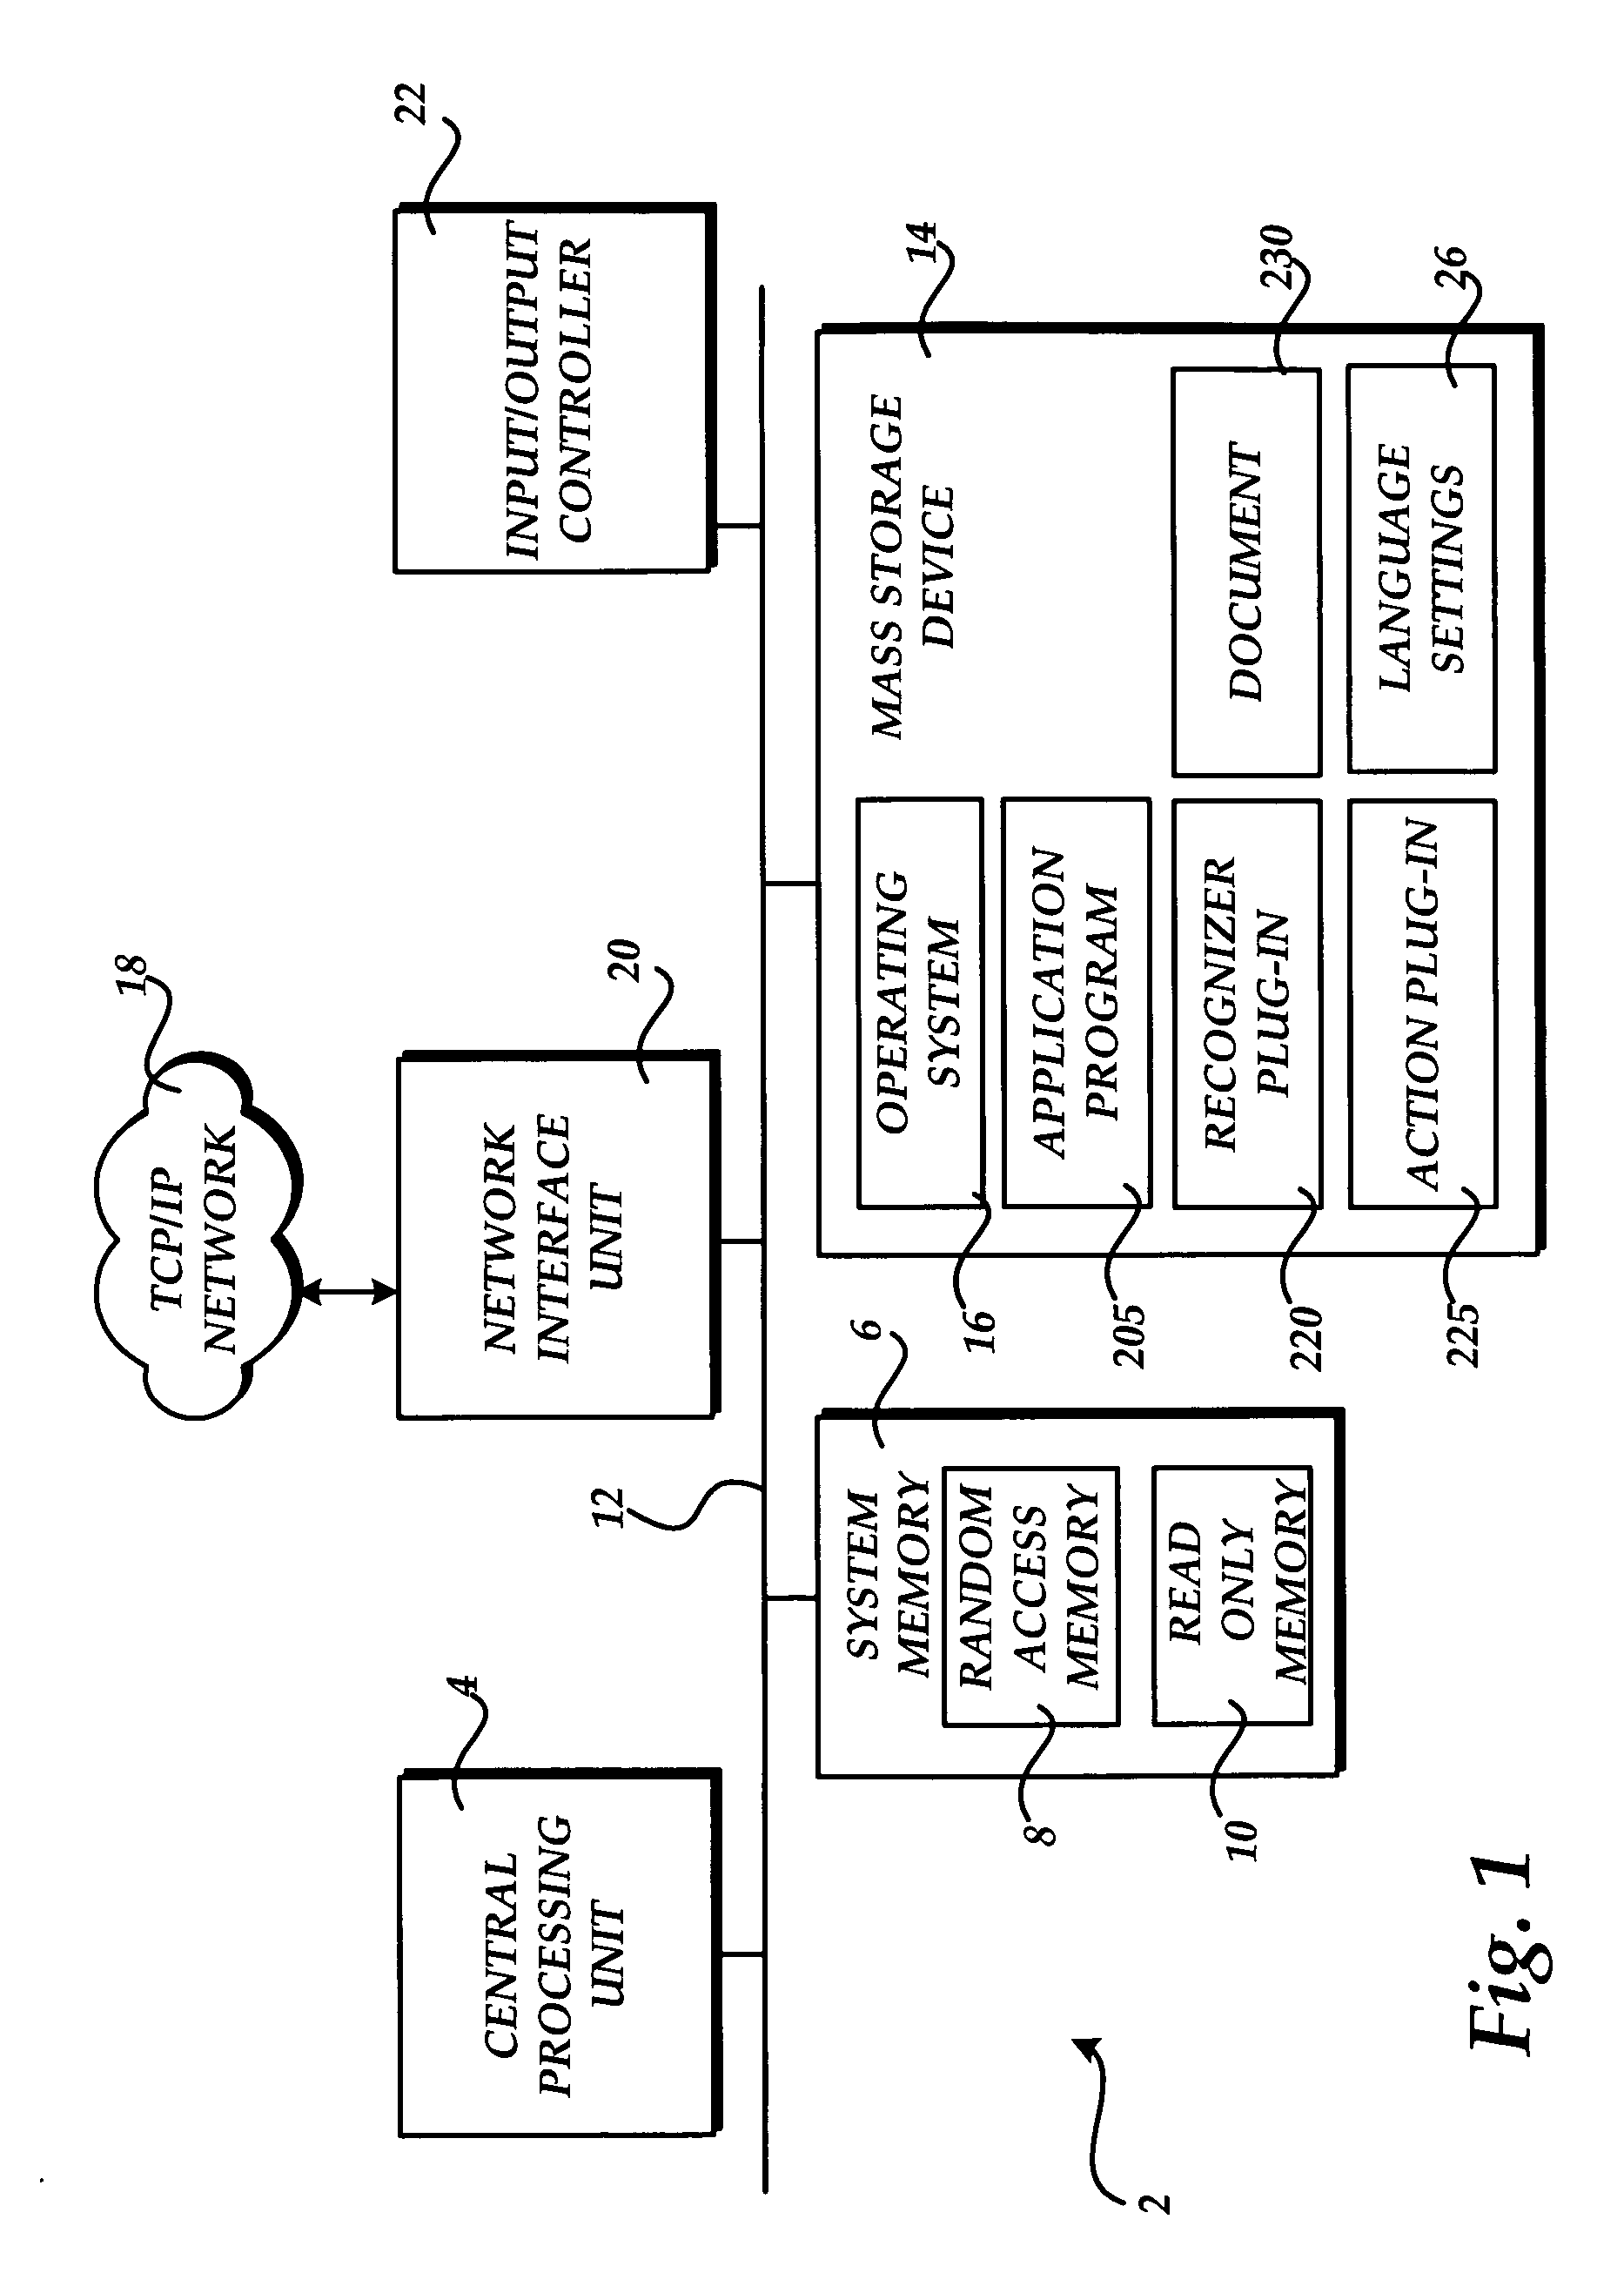 Methods and systems for providing automated actions on recognized text strings in a computer-generated document